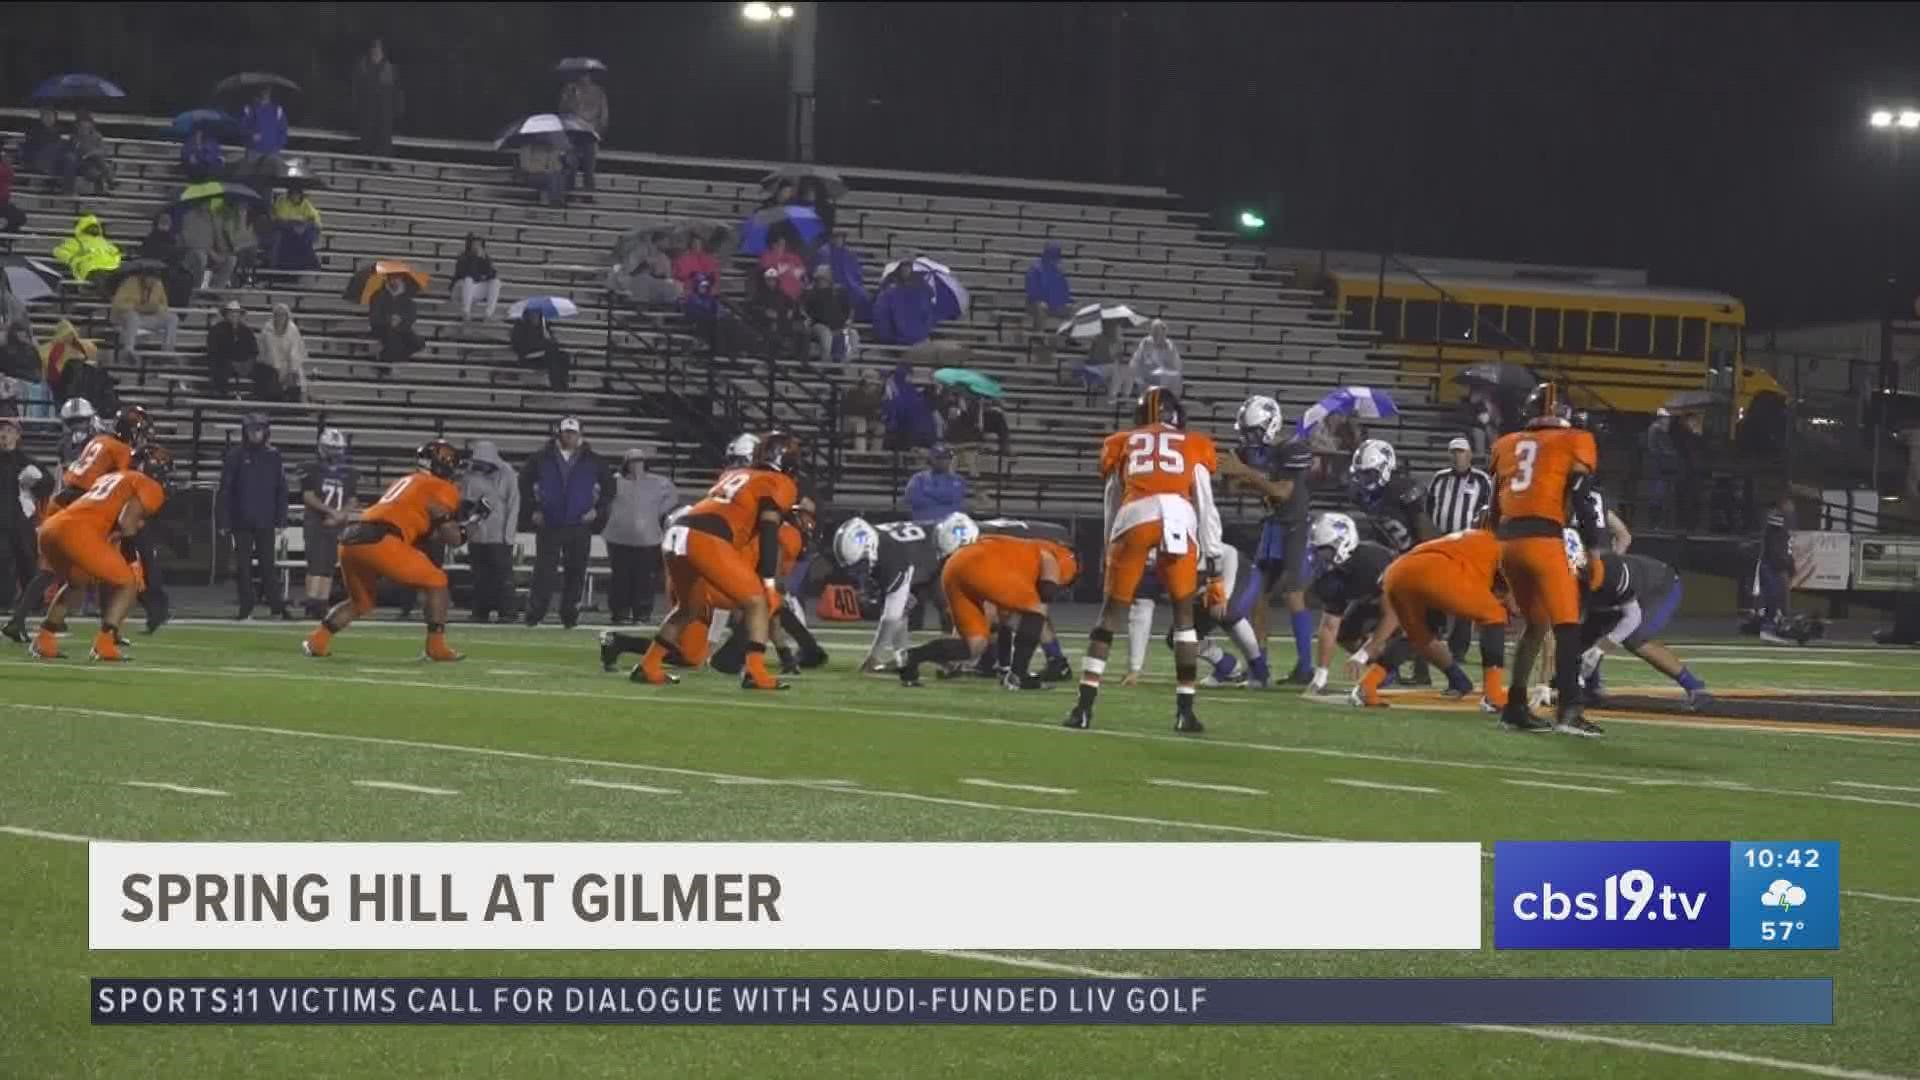 For more highlights, visit cbs19.tv/under-the-lights